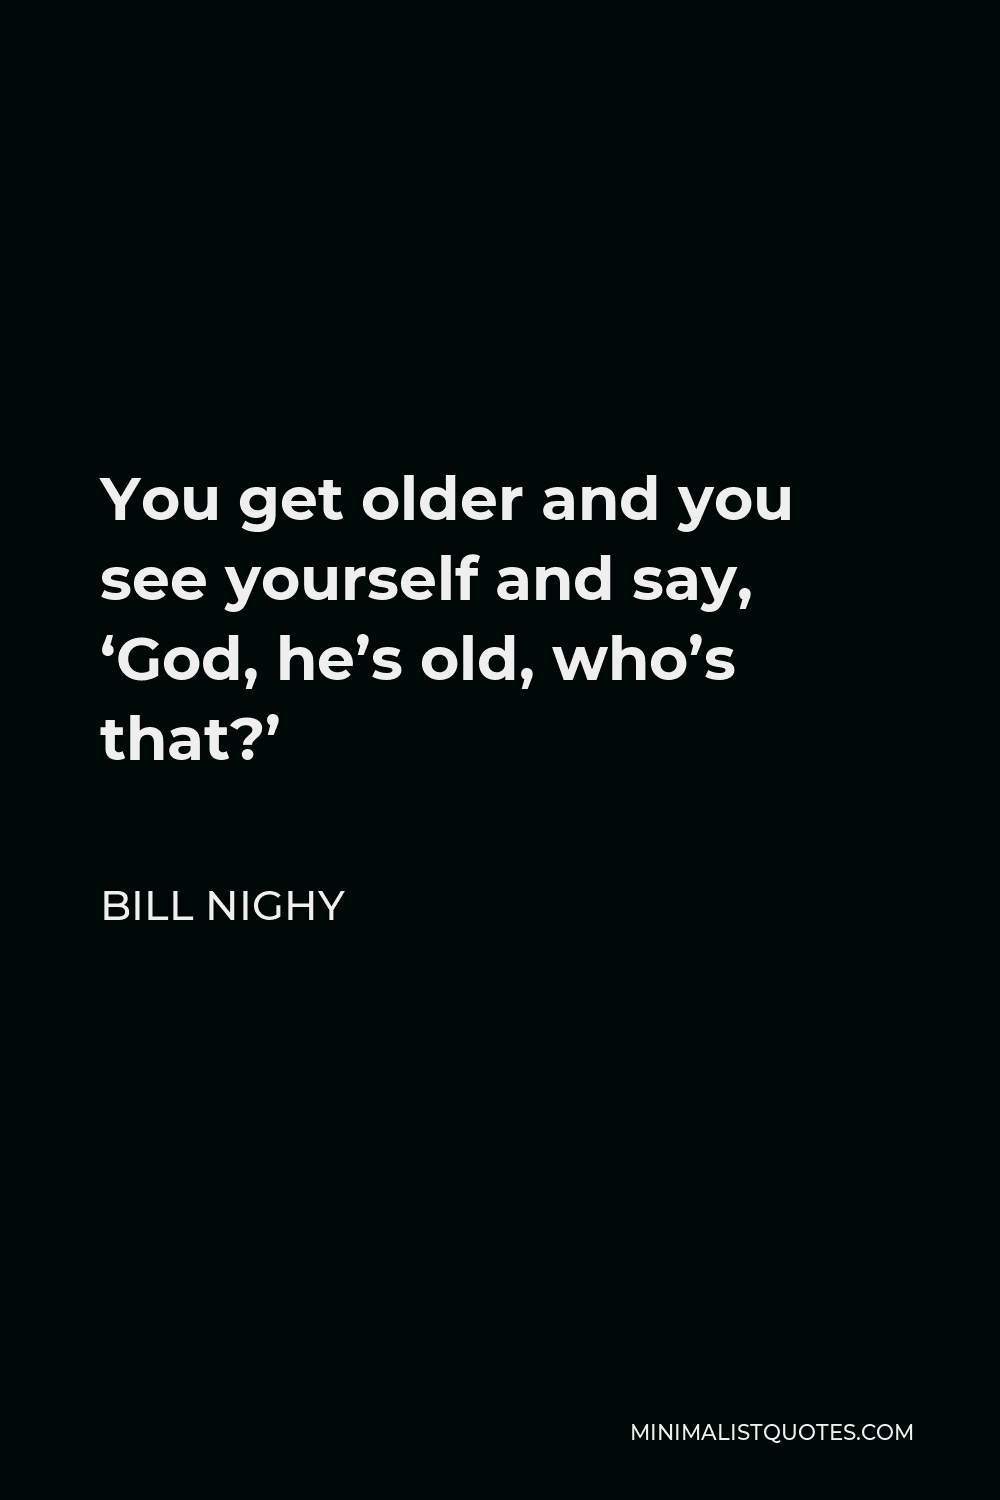 Bill Nighy Quote - You get older and you see yourself and say, ‘God, he’s old, who’s that?’